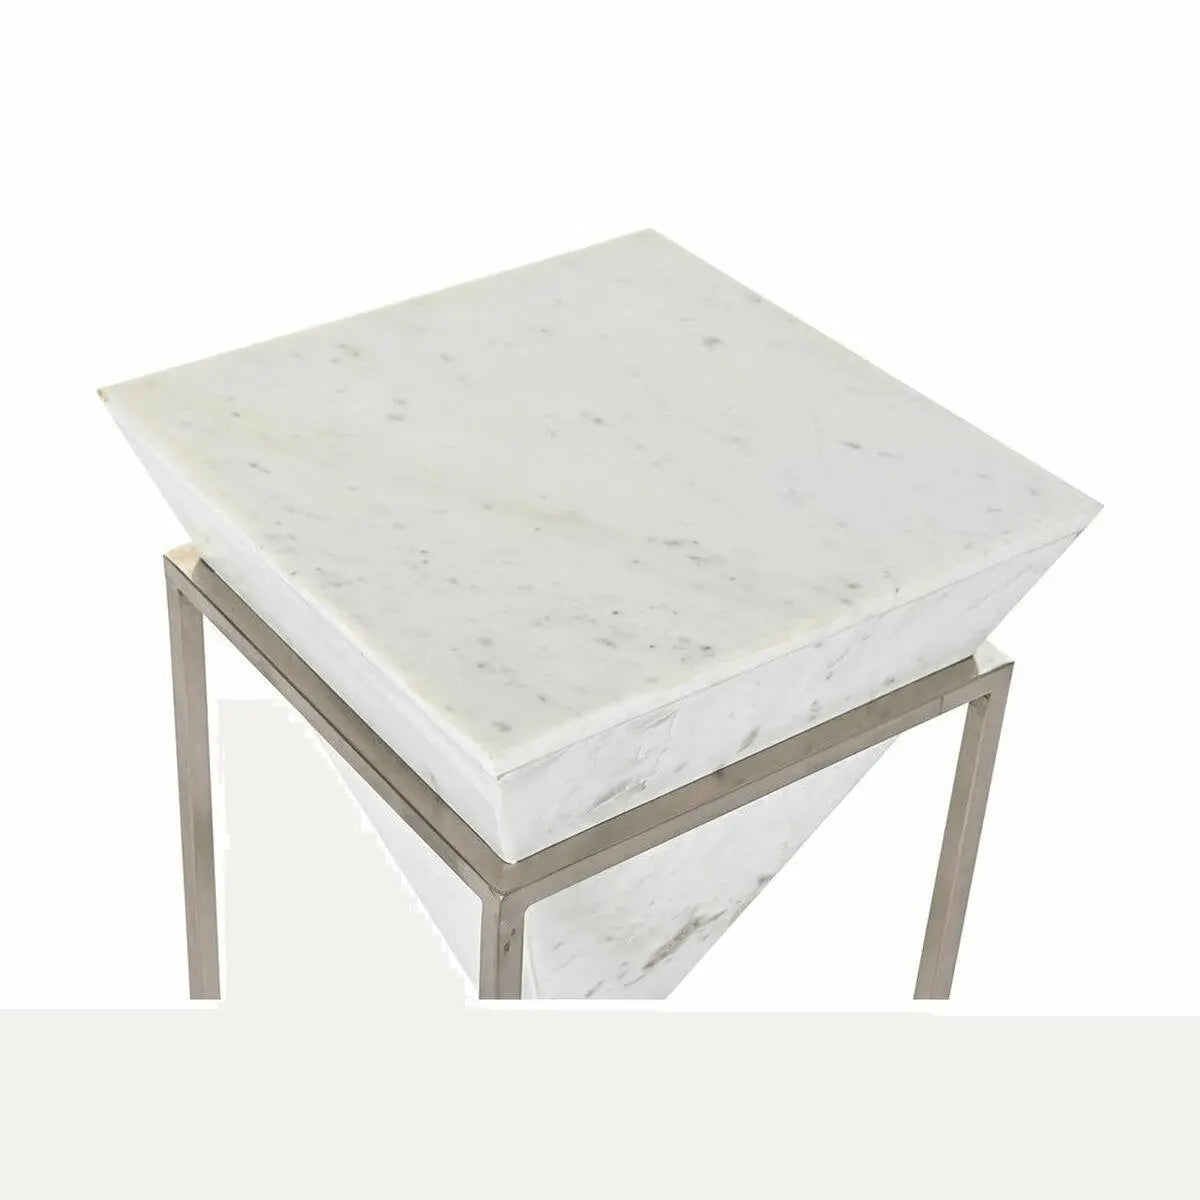 Side Table Silver Metal White Marble Modern. - Londecor